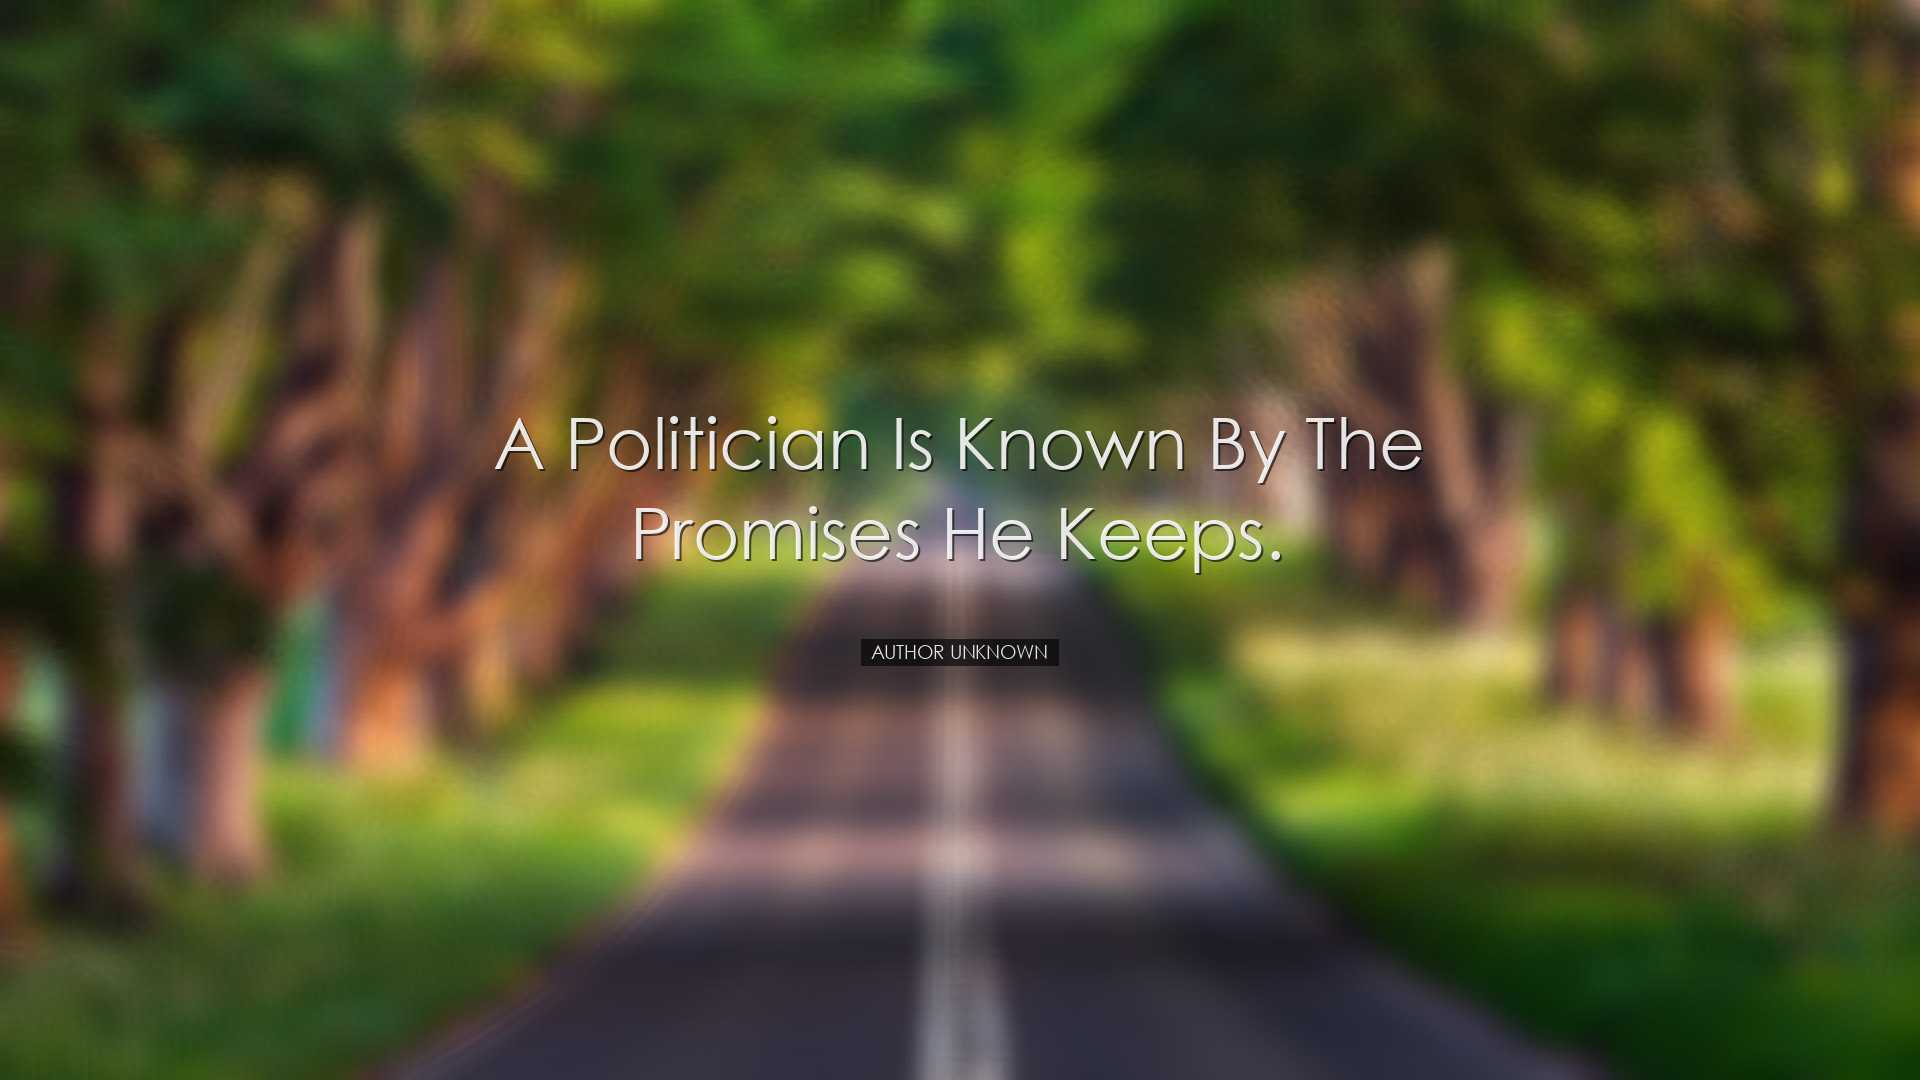 A politician is known by the promises he keeps. - Author Unknown